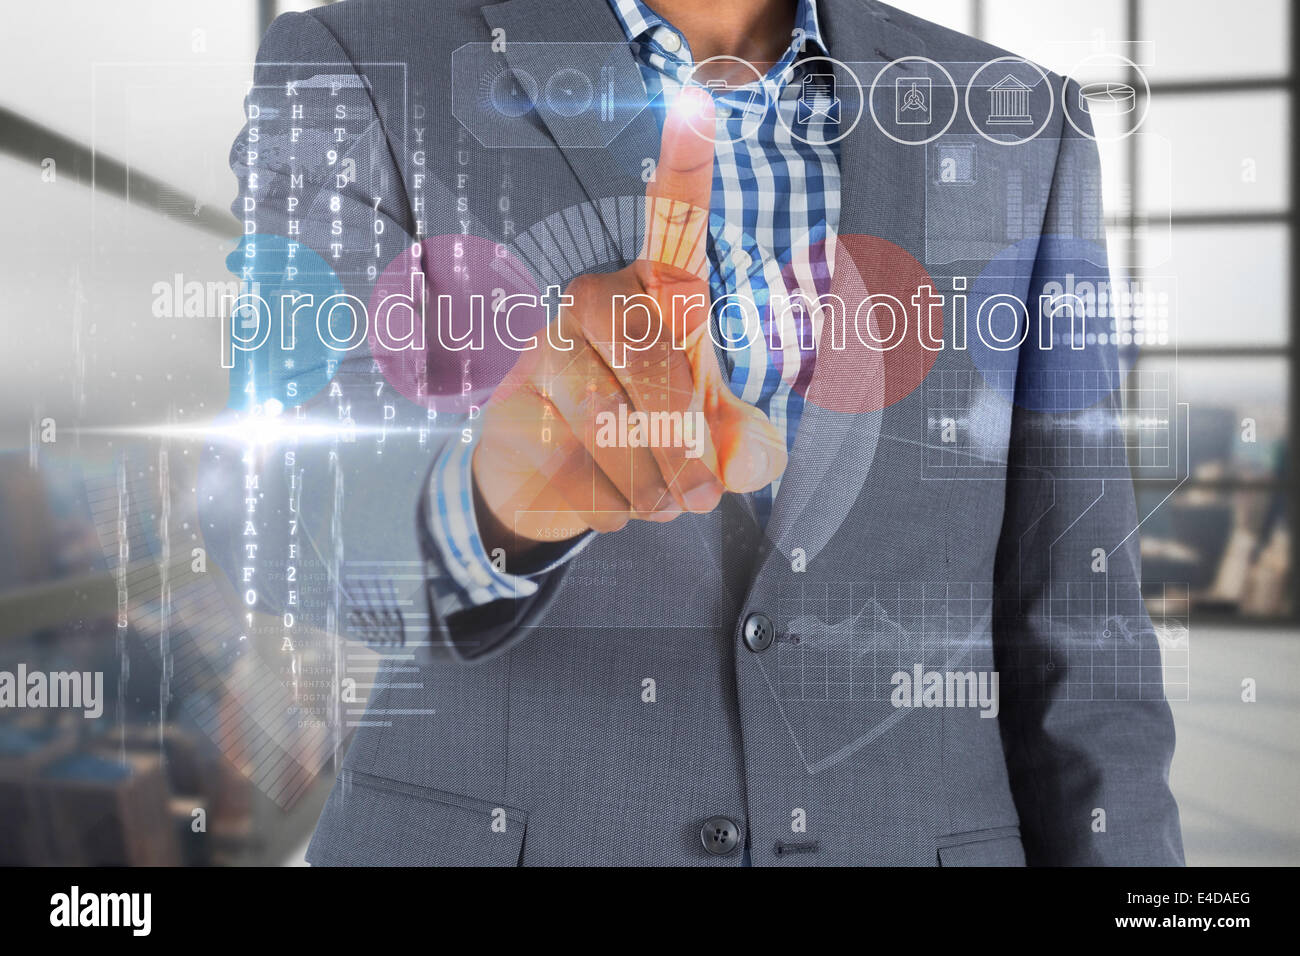 Businessman touching the words product promotion on interface Stock Photo